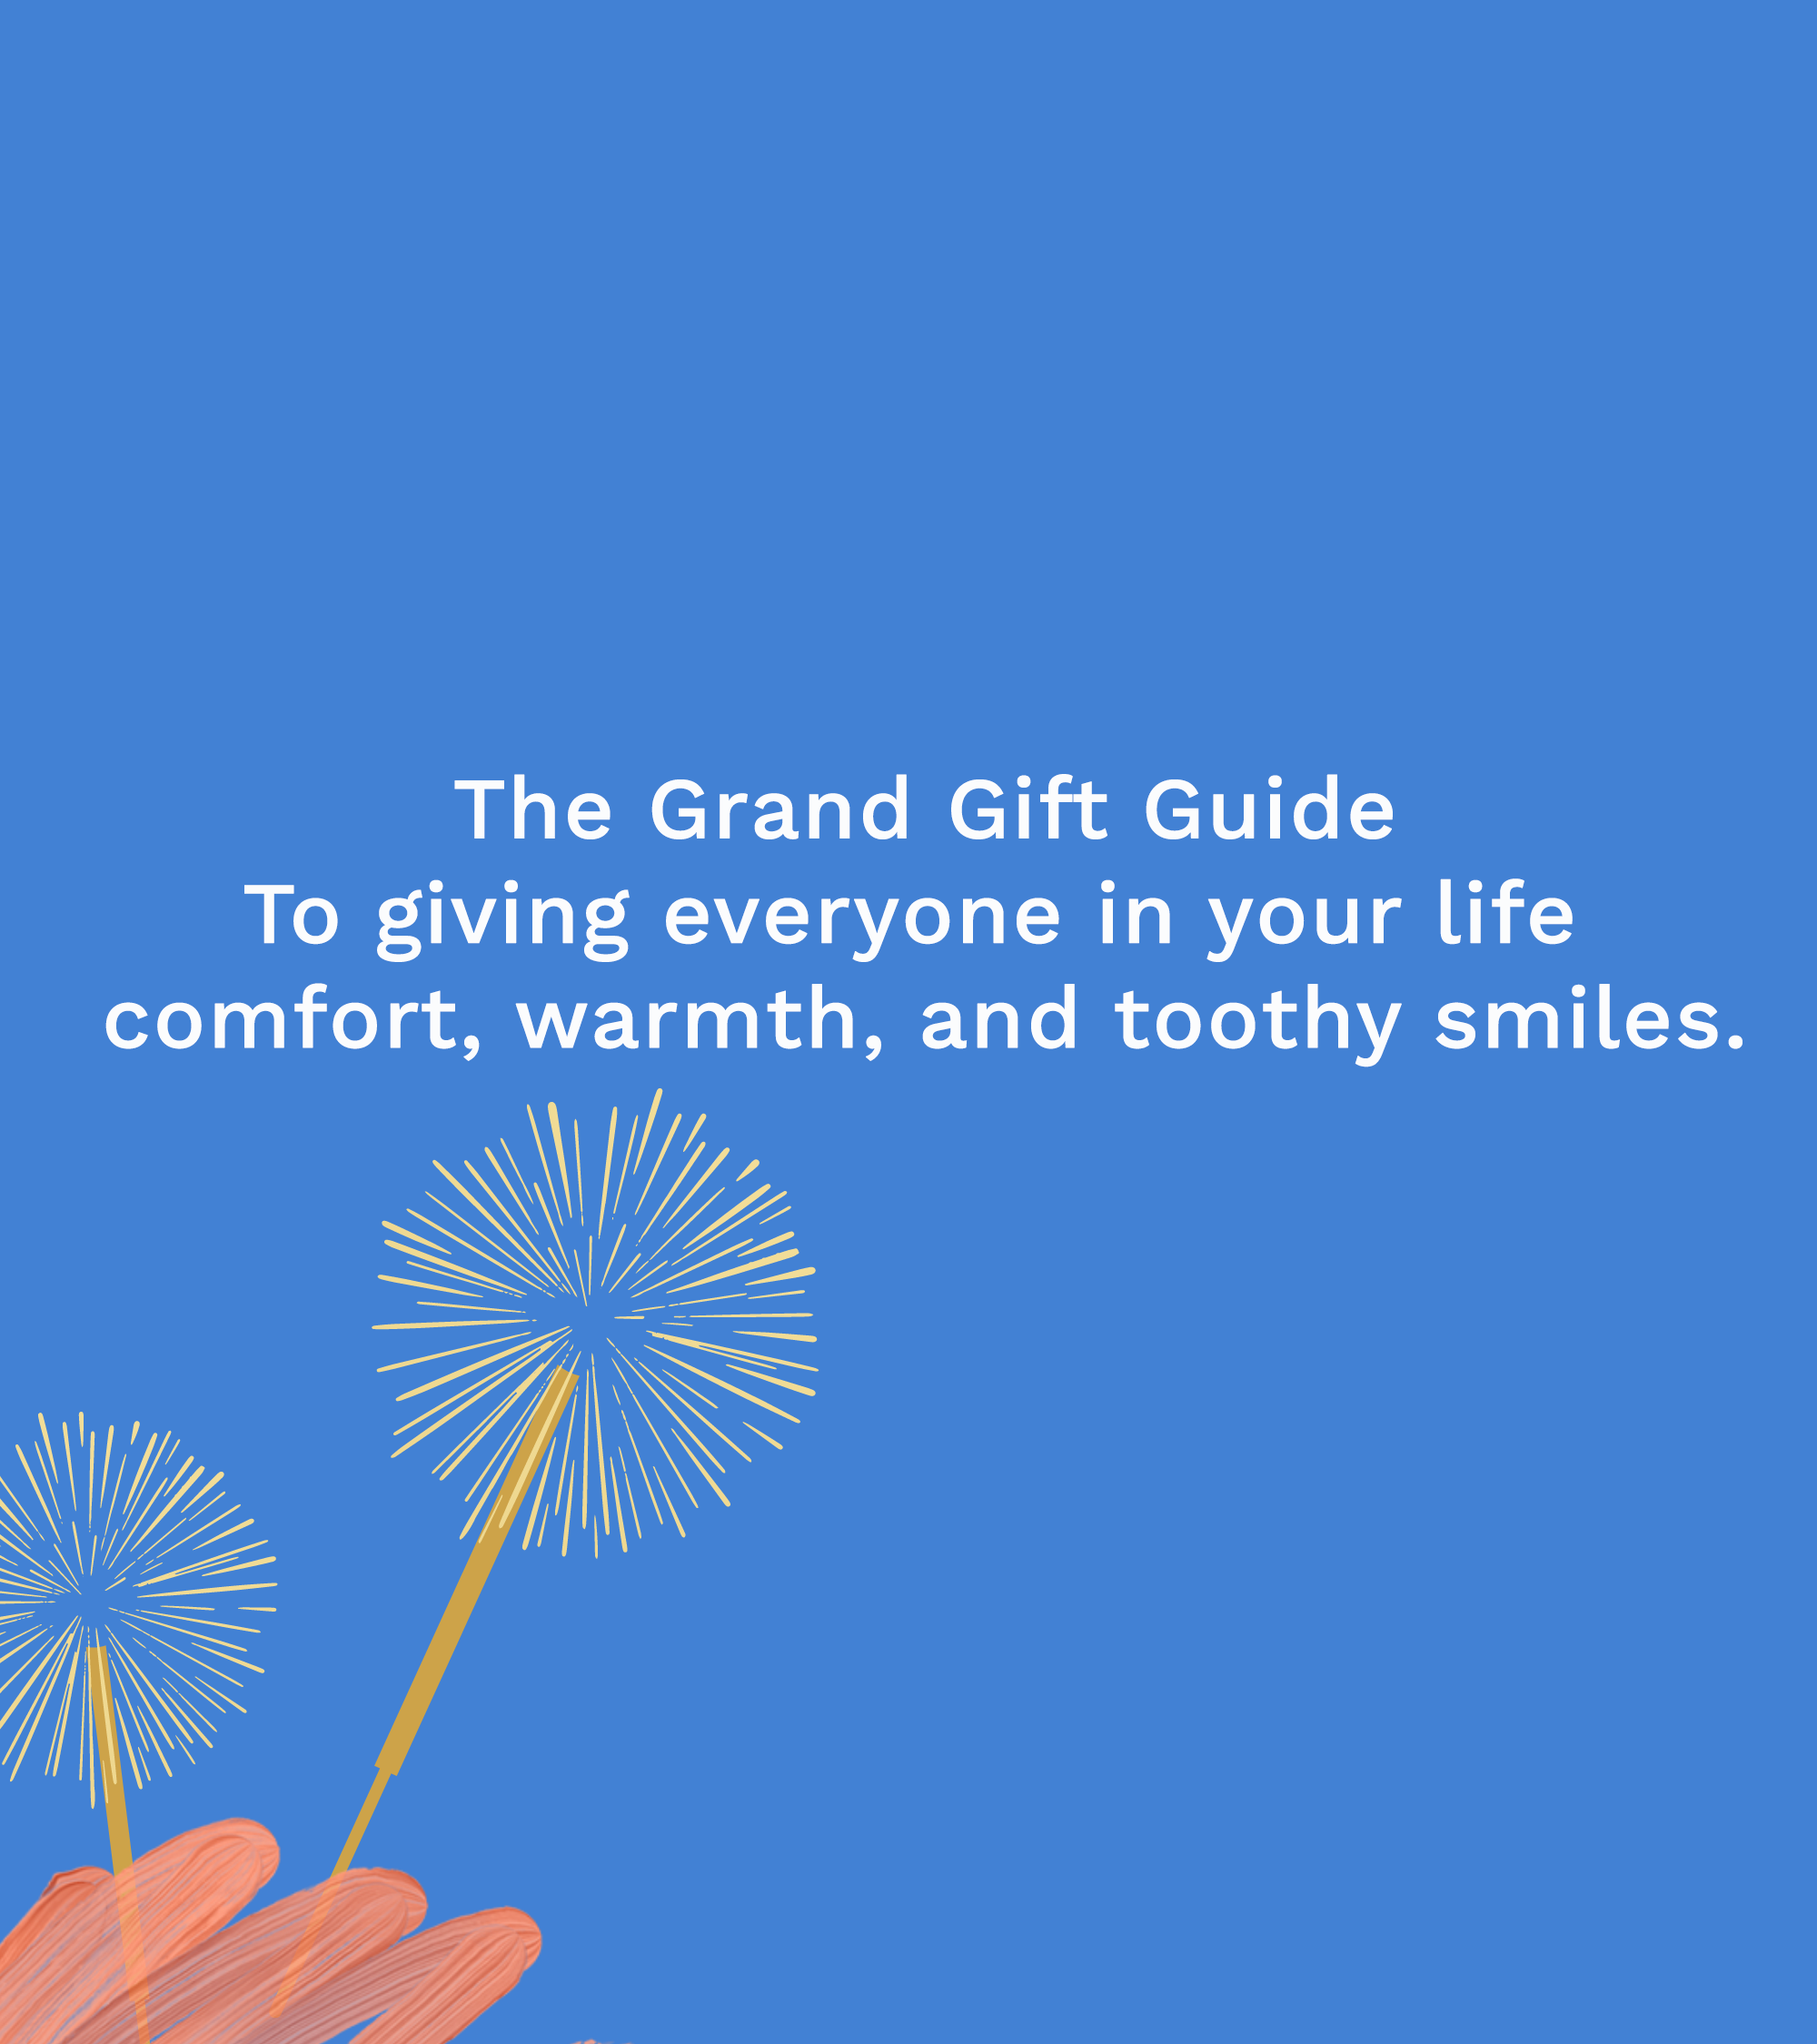 The Grand Gift Guide. To giving in your life comfort, warmth and toothy smiles.